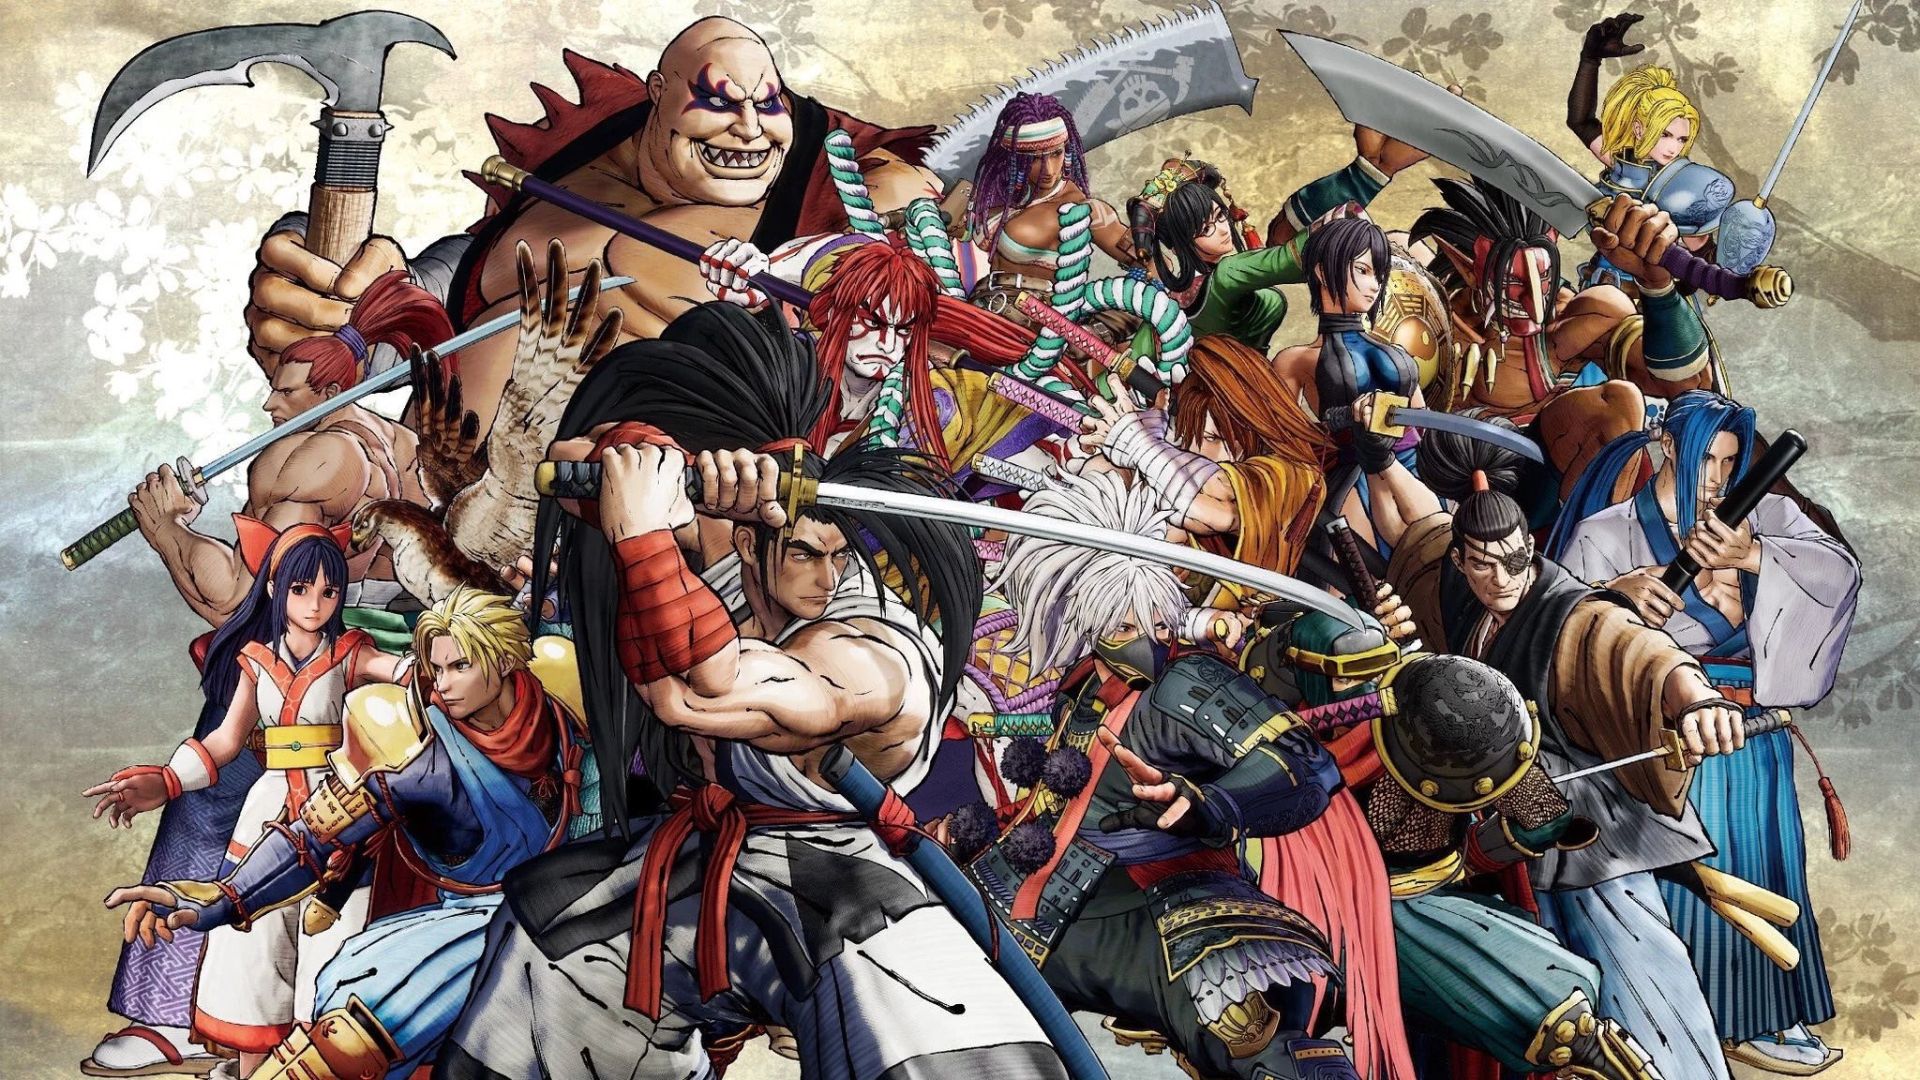 Samurai Shodown Out on March 16 for Xbox Series X/S, Supports 120 FPS